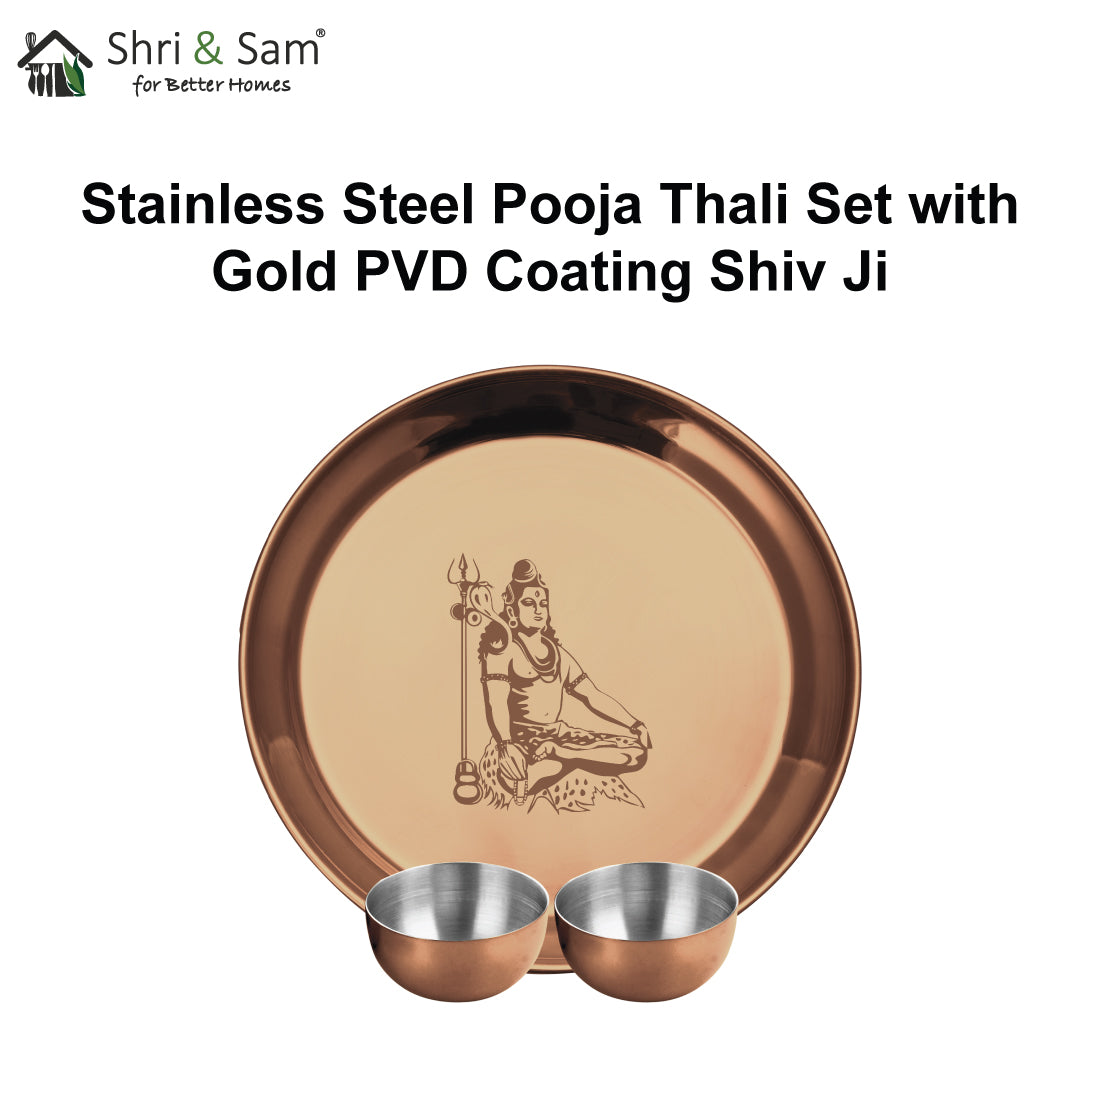 Stainless Steel Pooja Thali Set with Rose Gold PVD Coating Shiv